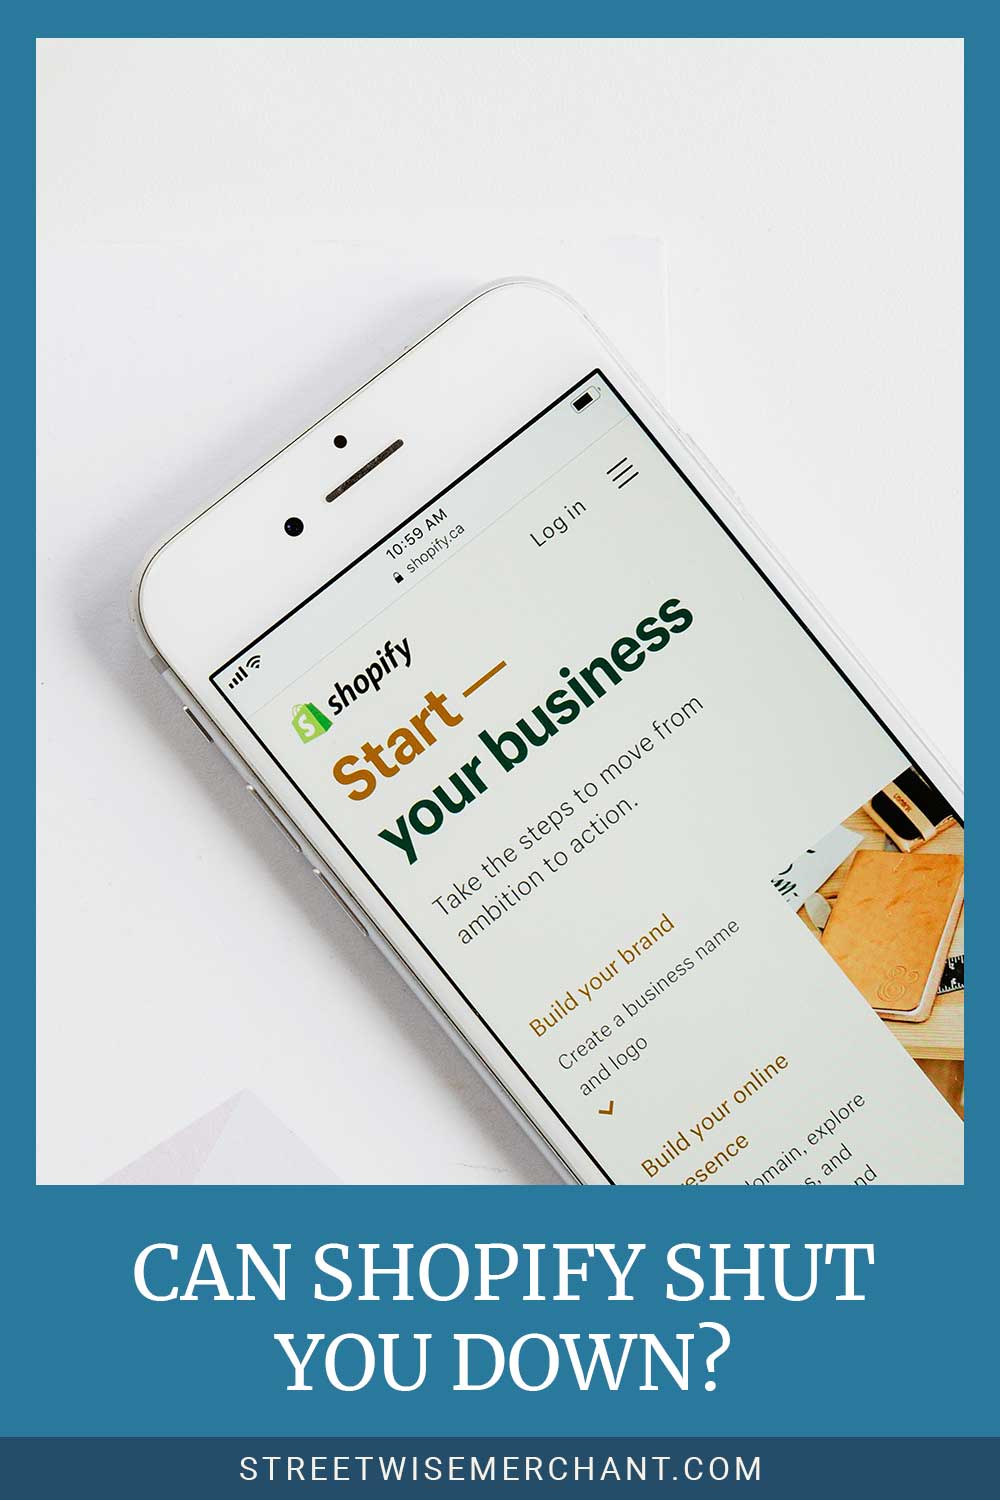 Shopify website page on a phone screen - Can they Shut You Down?